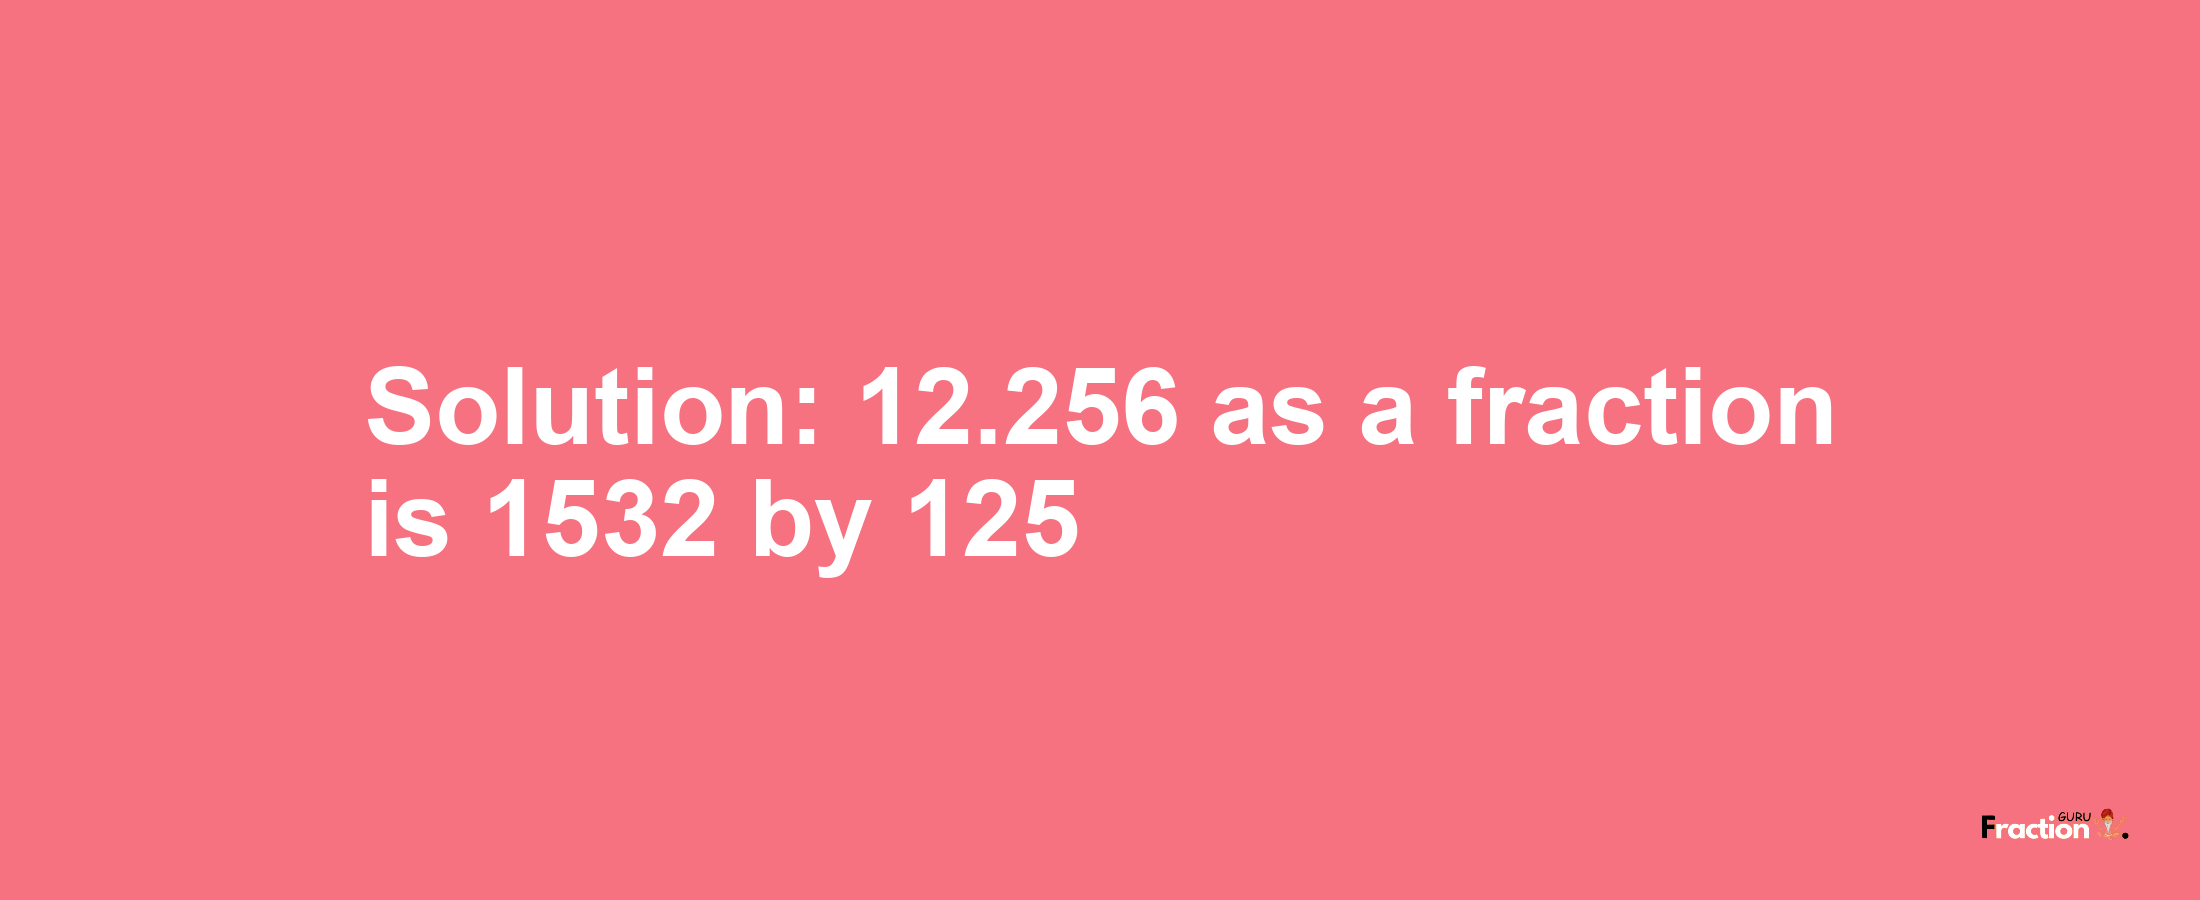 Solution:12.256 as a fraction is 1532/125